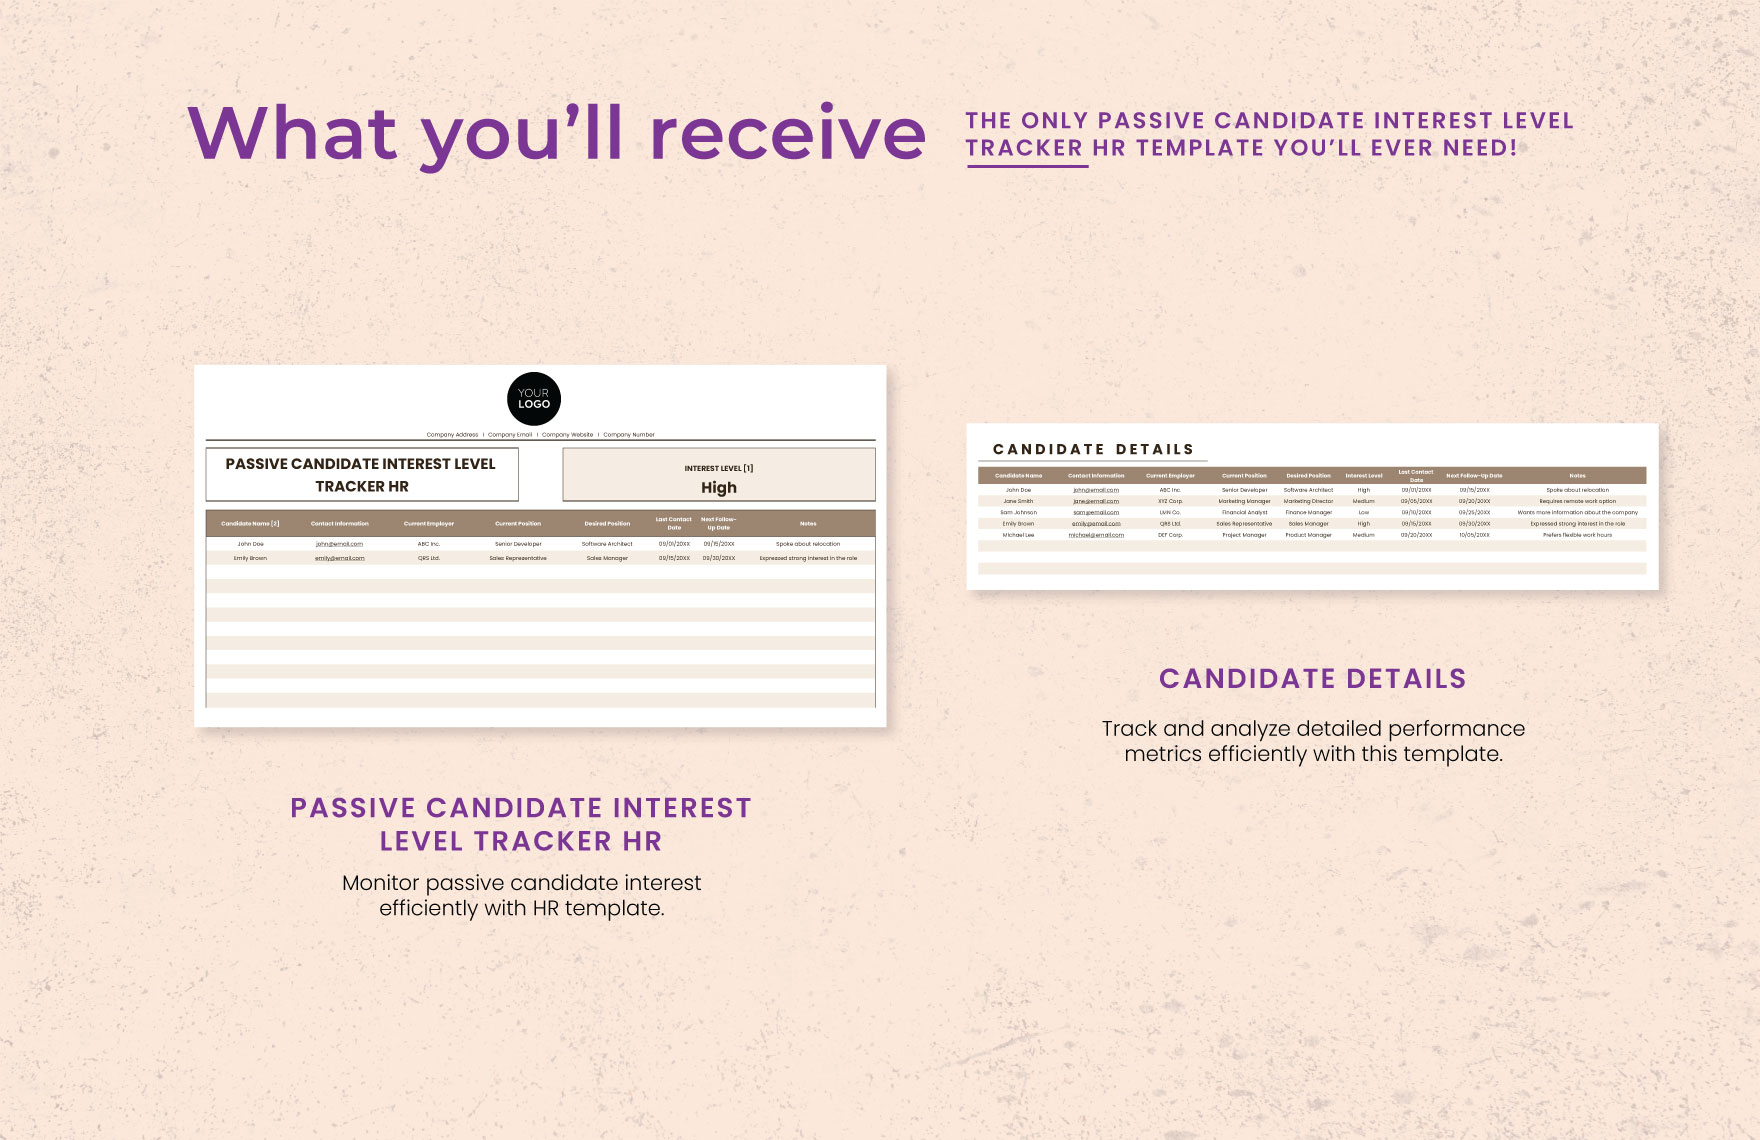 Passive Candidate Interest Level Tracker HR Template